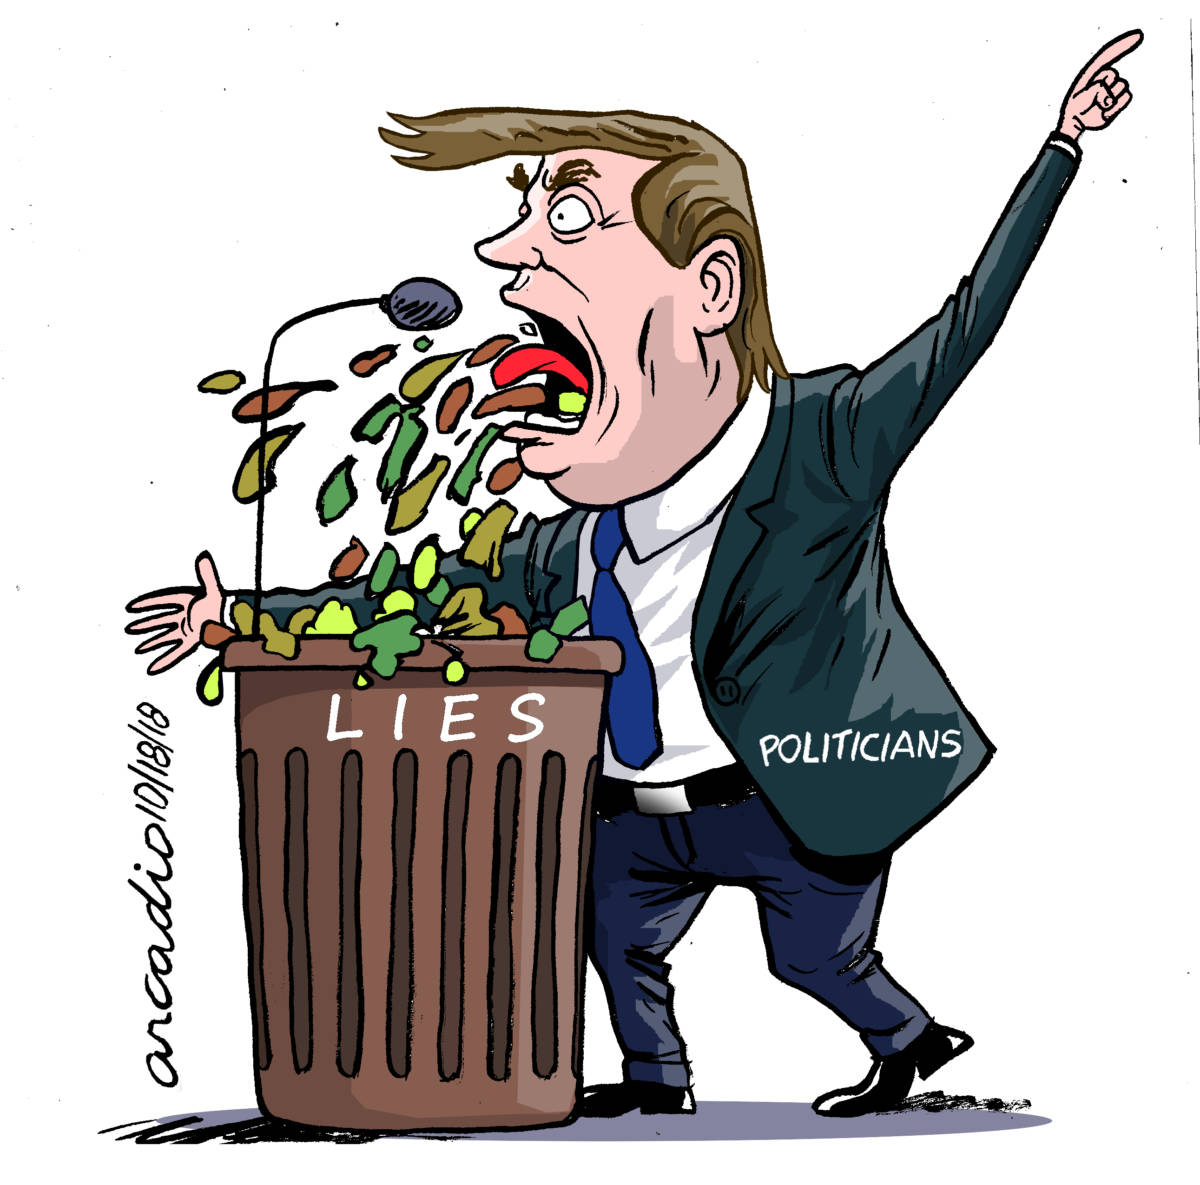 Political lies, Arcadio Esquivel, southern Utah, Utah, St. George, The Independent, Politicians,Diplomacy,Democracy,Freedom,Campaigns,Political Parties